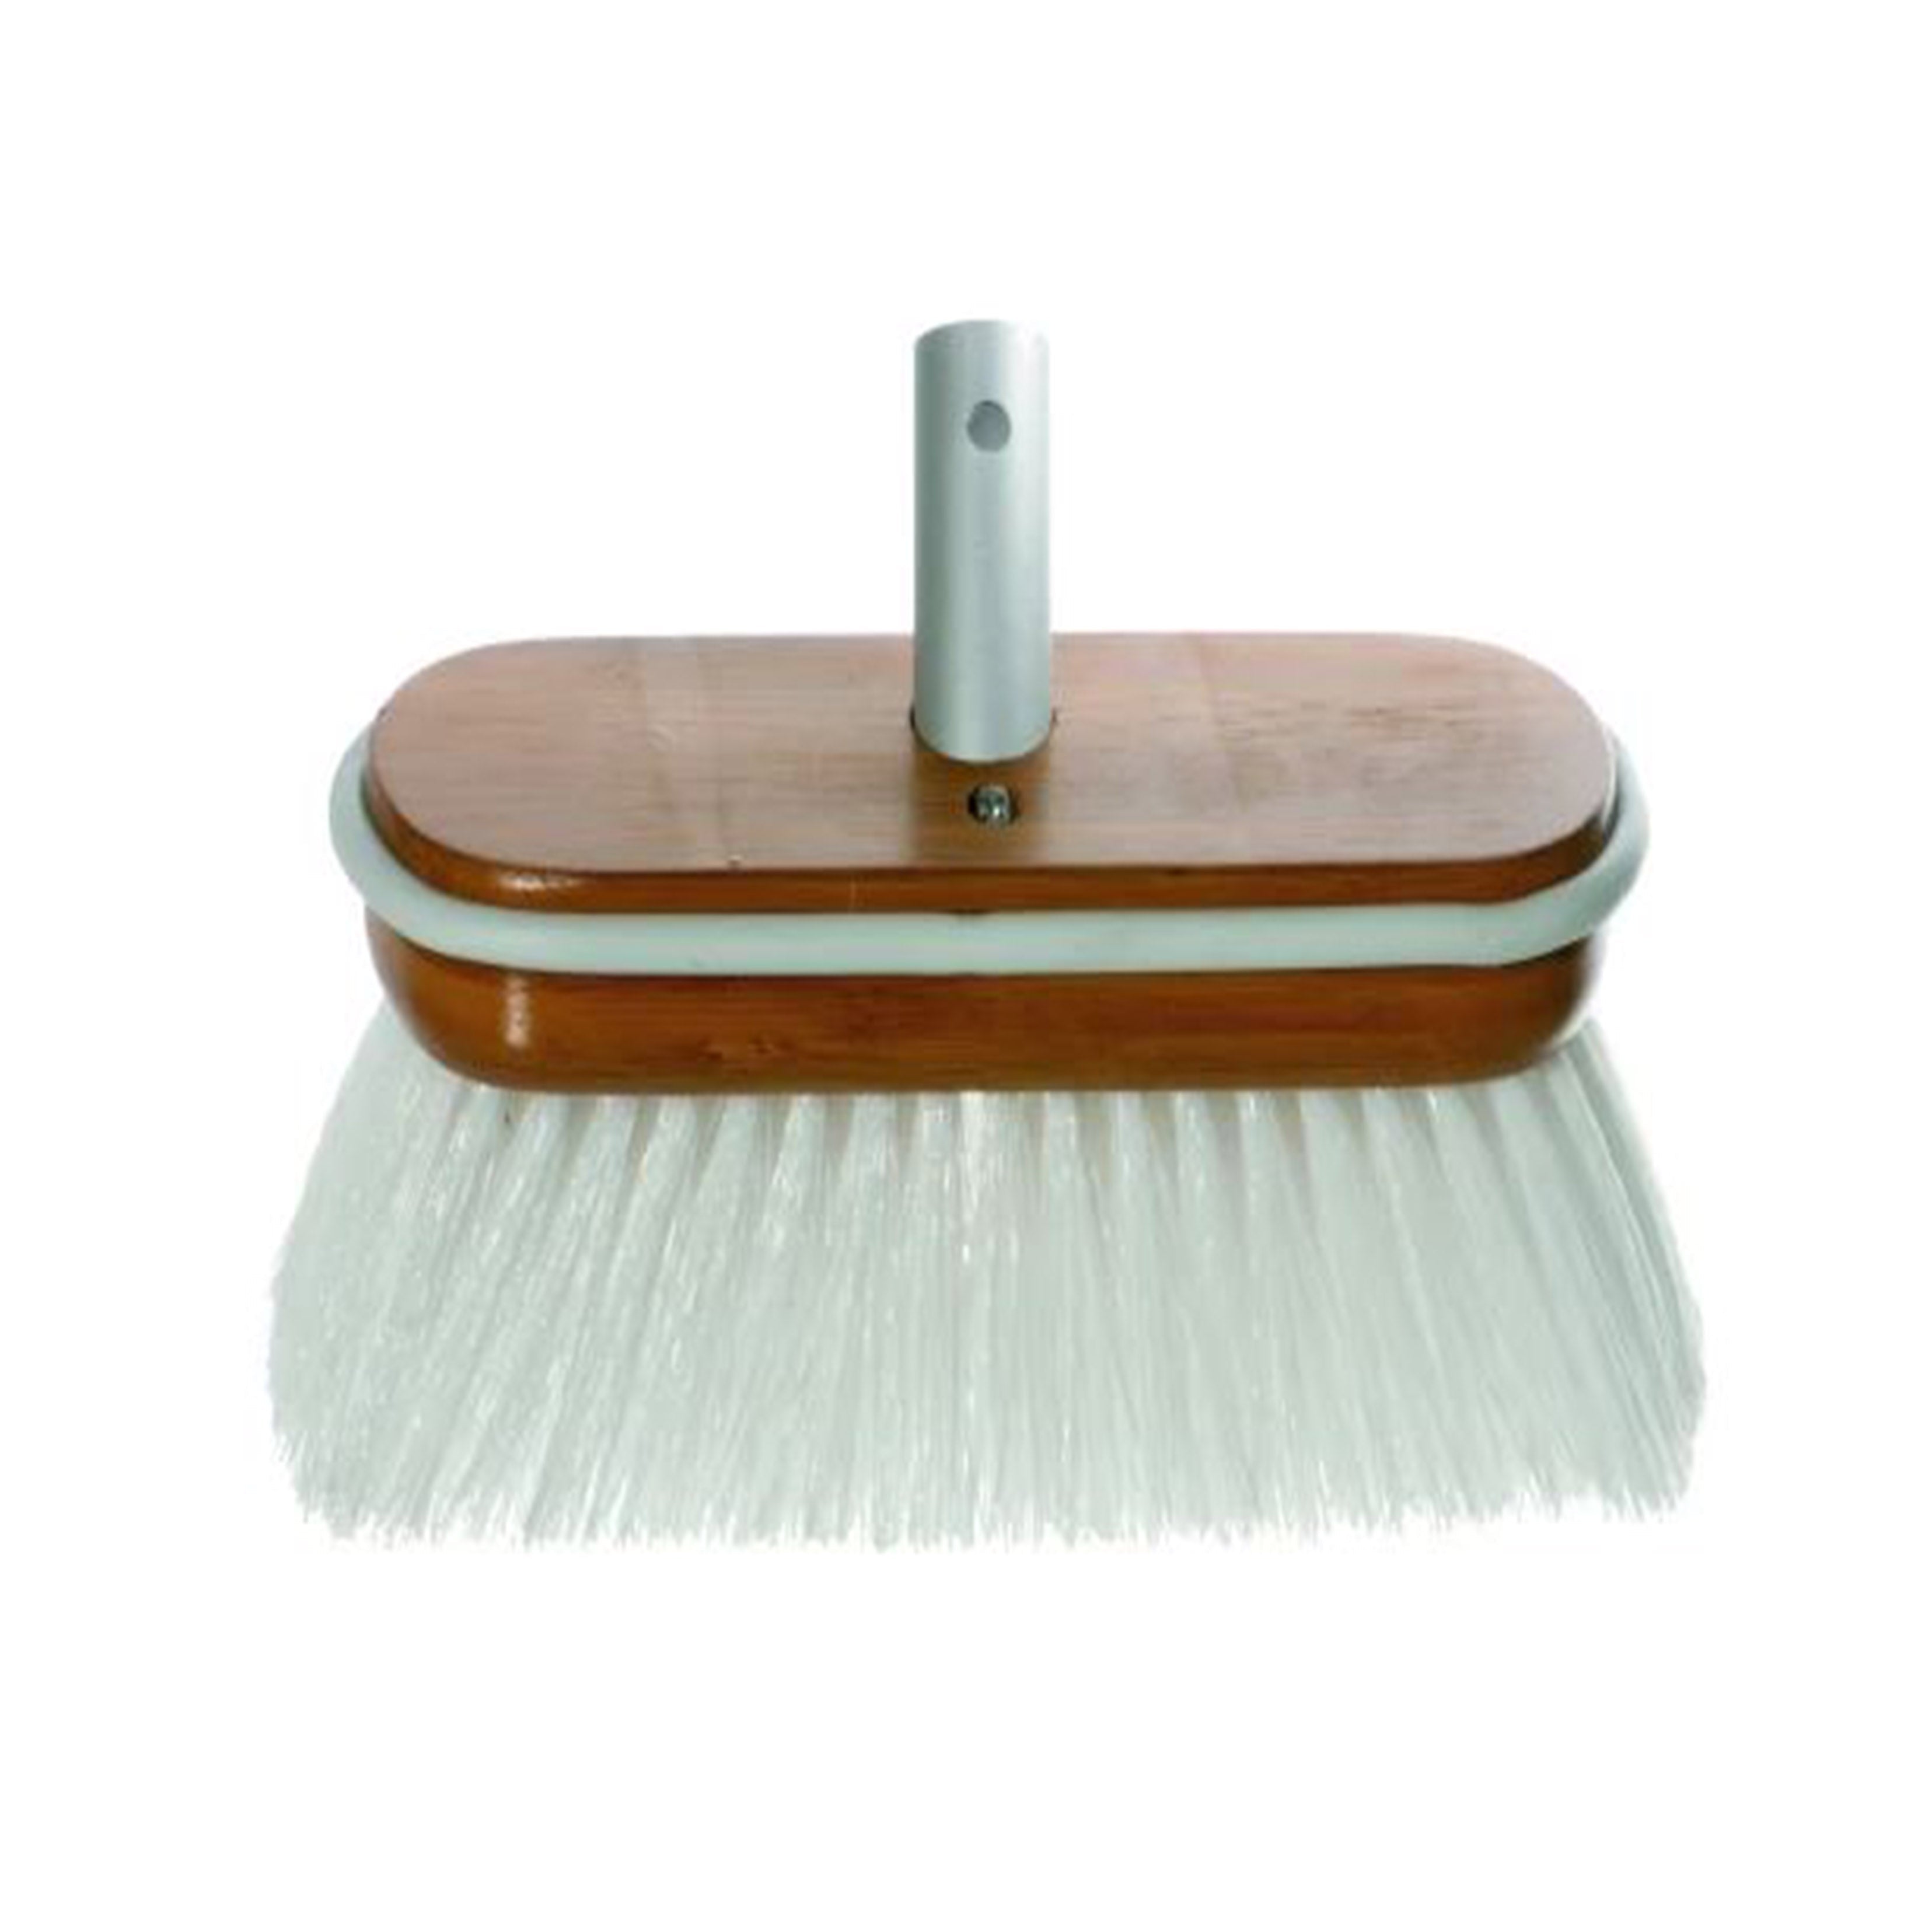 BRUSH DELUXE HARD WITH WATER FLOW THROUGH